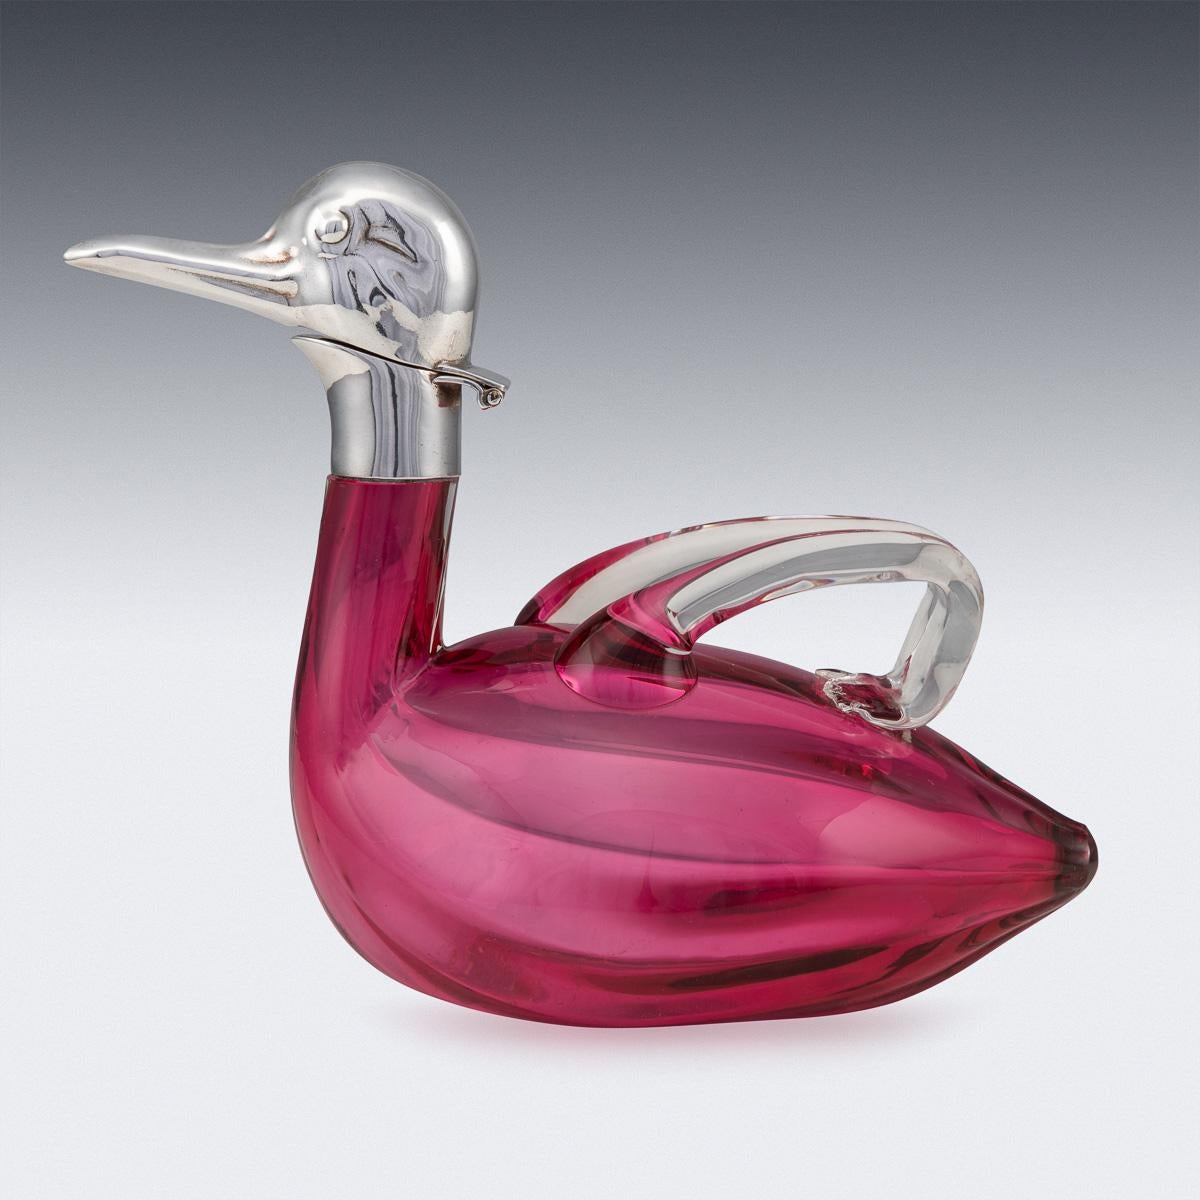 Antique mid-20th century Czechoslovakian silver plated mounted novelty claret jug modelled as a duck, pink glass body, the wings forming the handles, hinged head set with glass eyes, stamped Czechoslovakia. Such novelty claret jugs are rare and